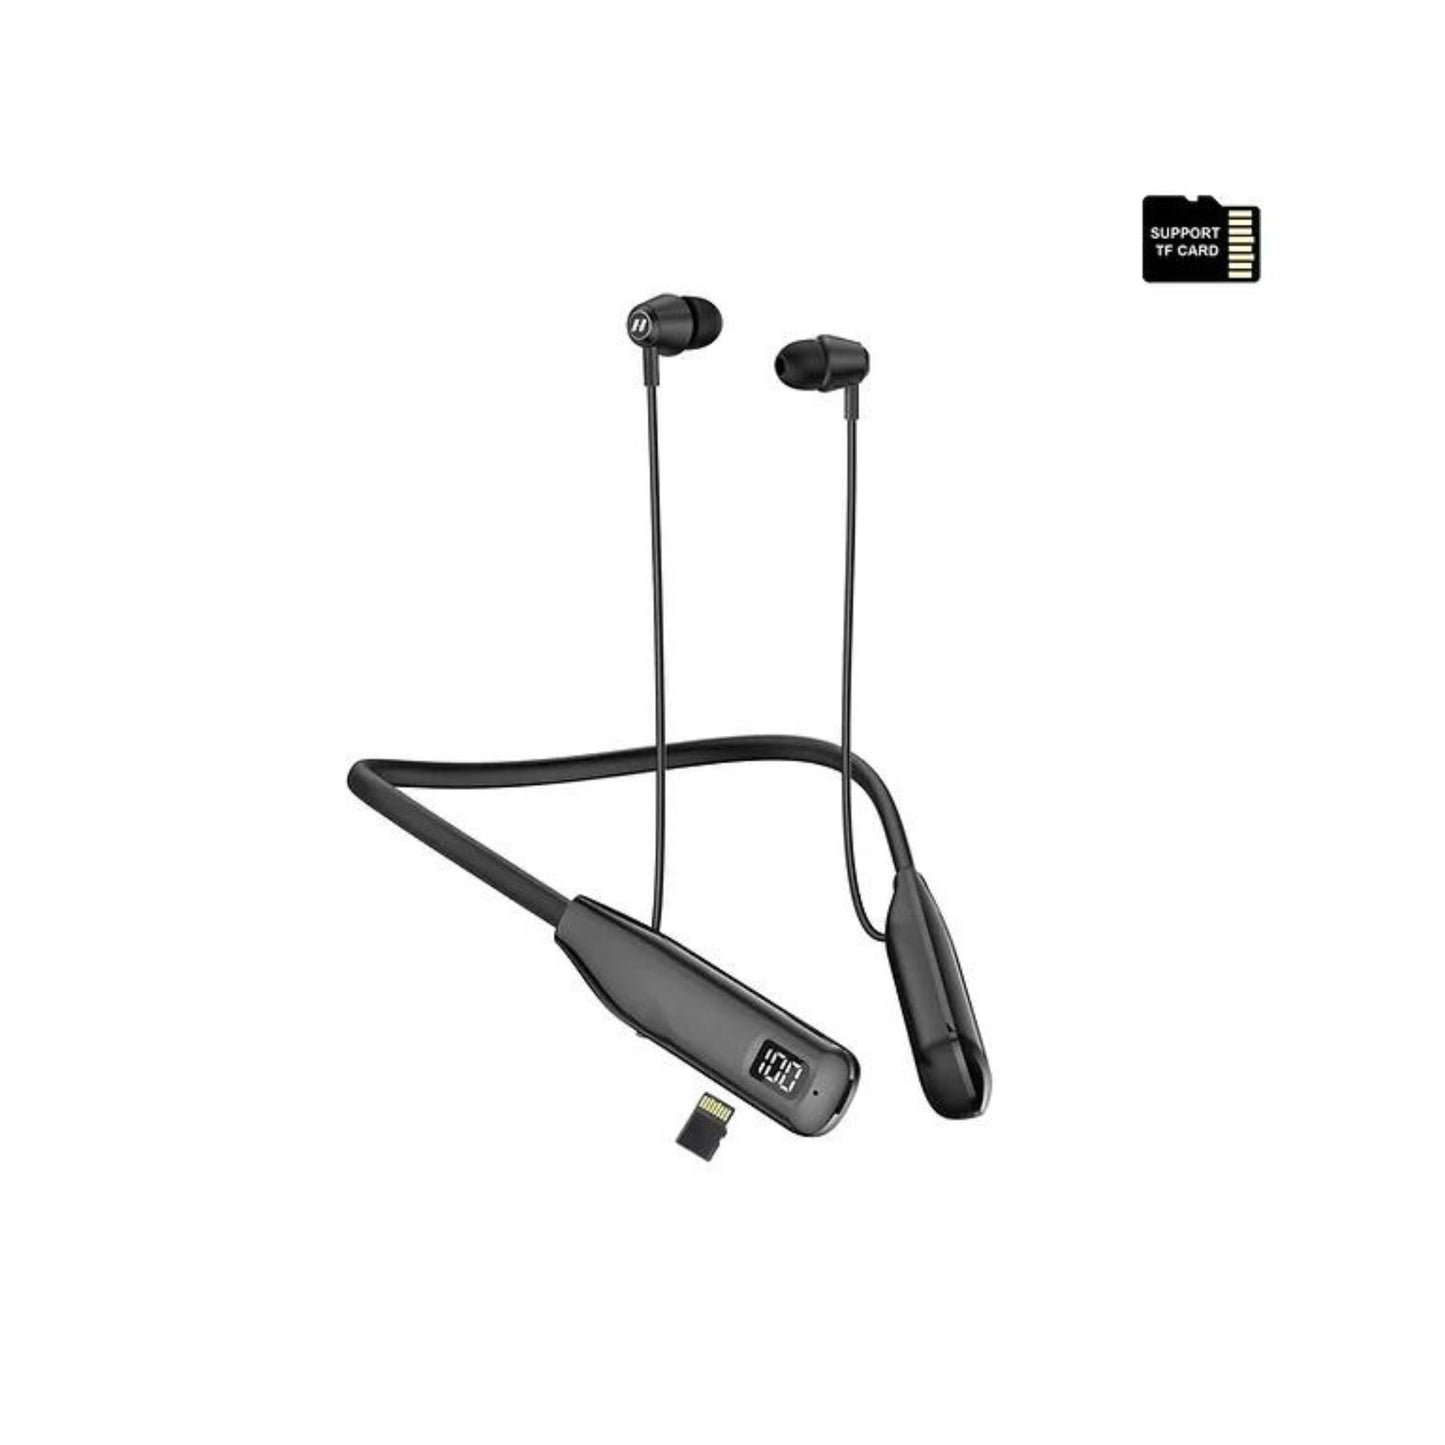 Haino Teko Germany HN110 Bluetooth Neck Band Earphone 110 Hours Music With High Bass Sound Quality Super Clear Mic and Support TF Card_Black